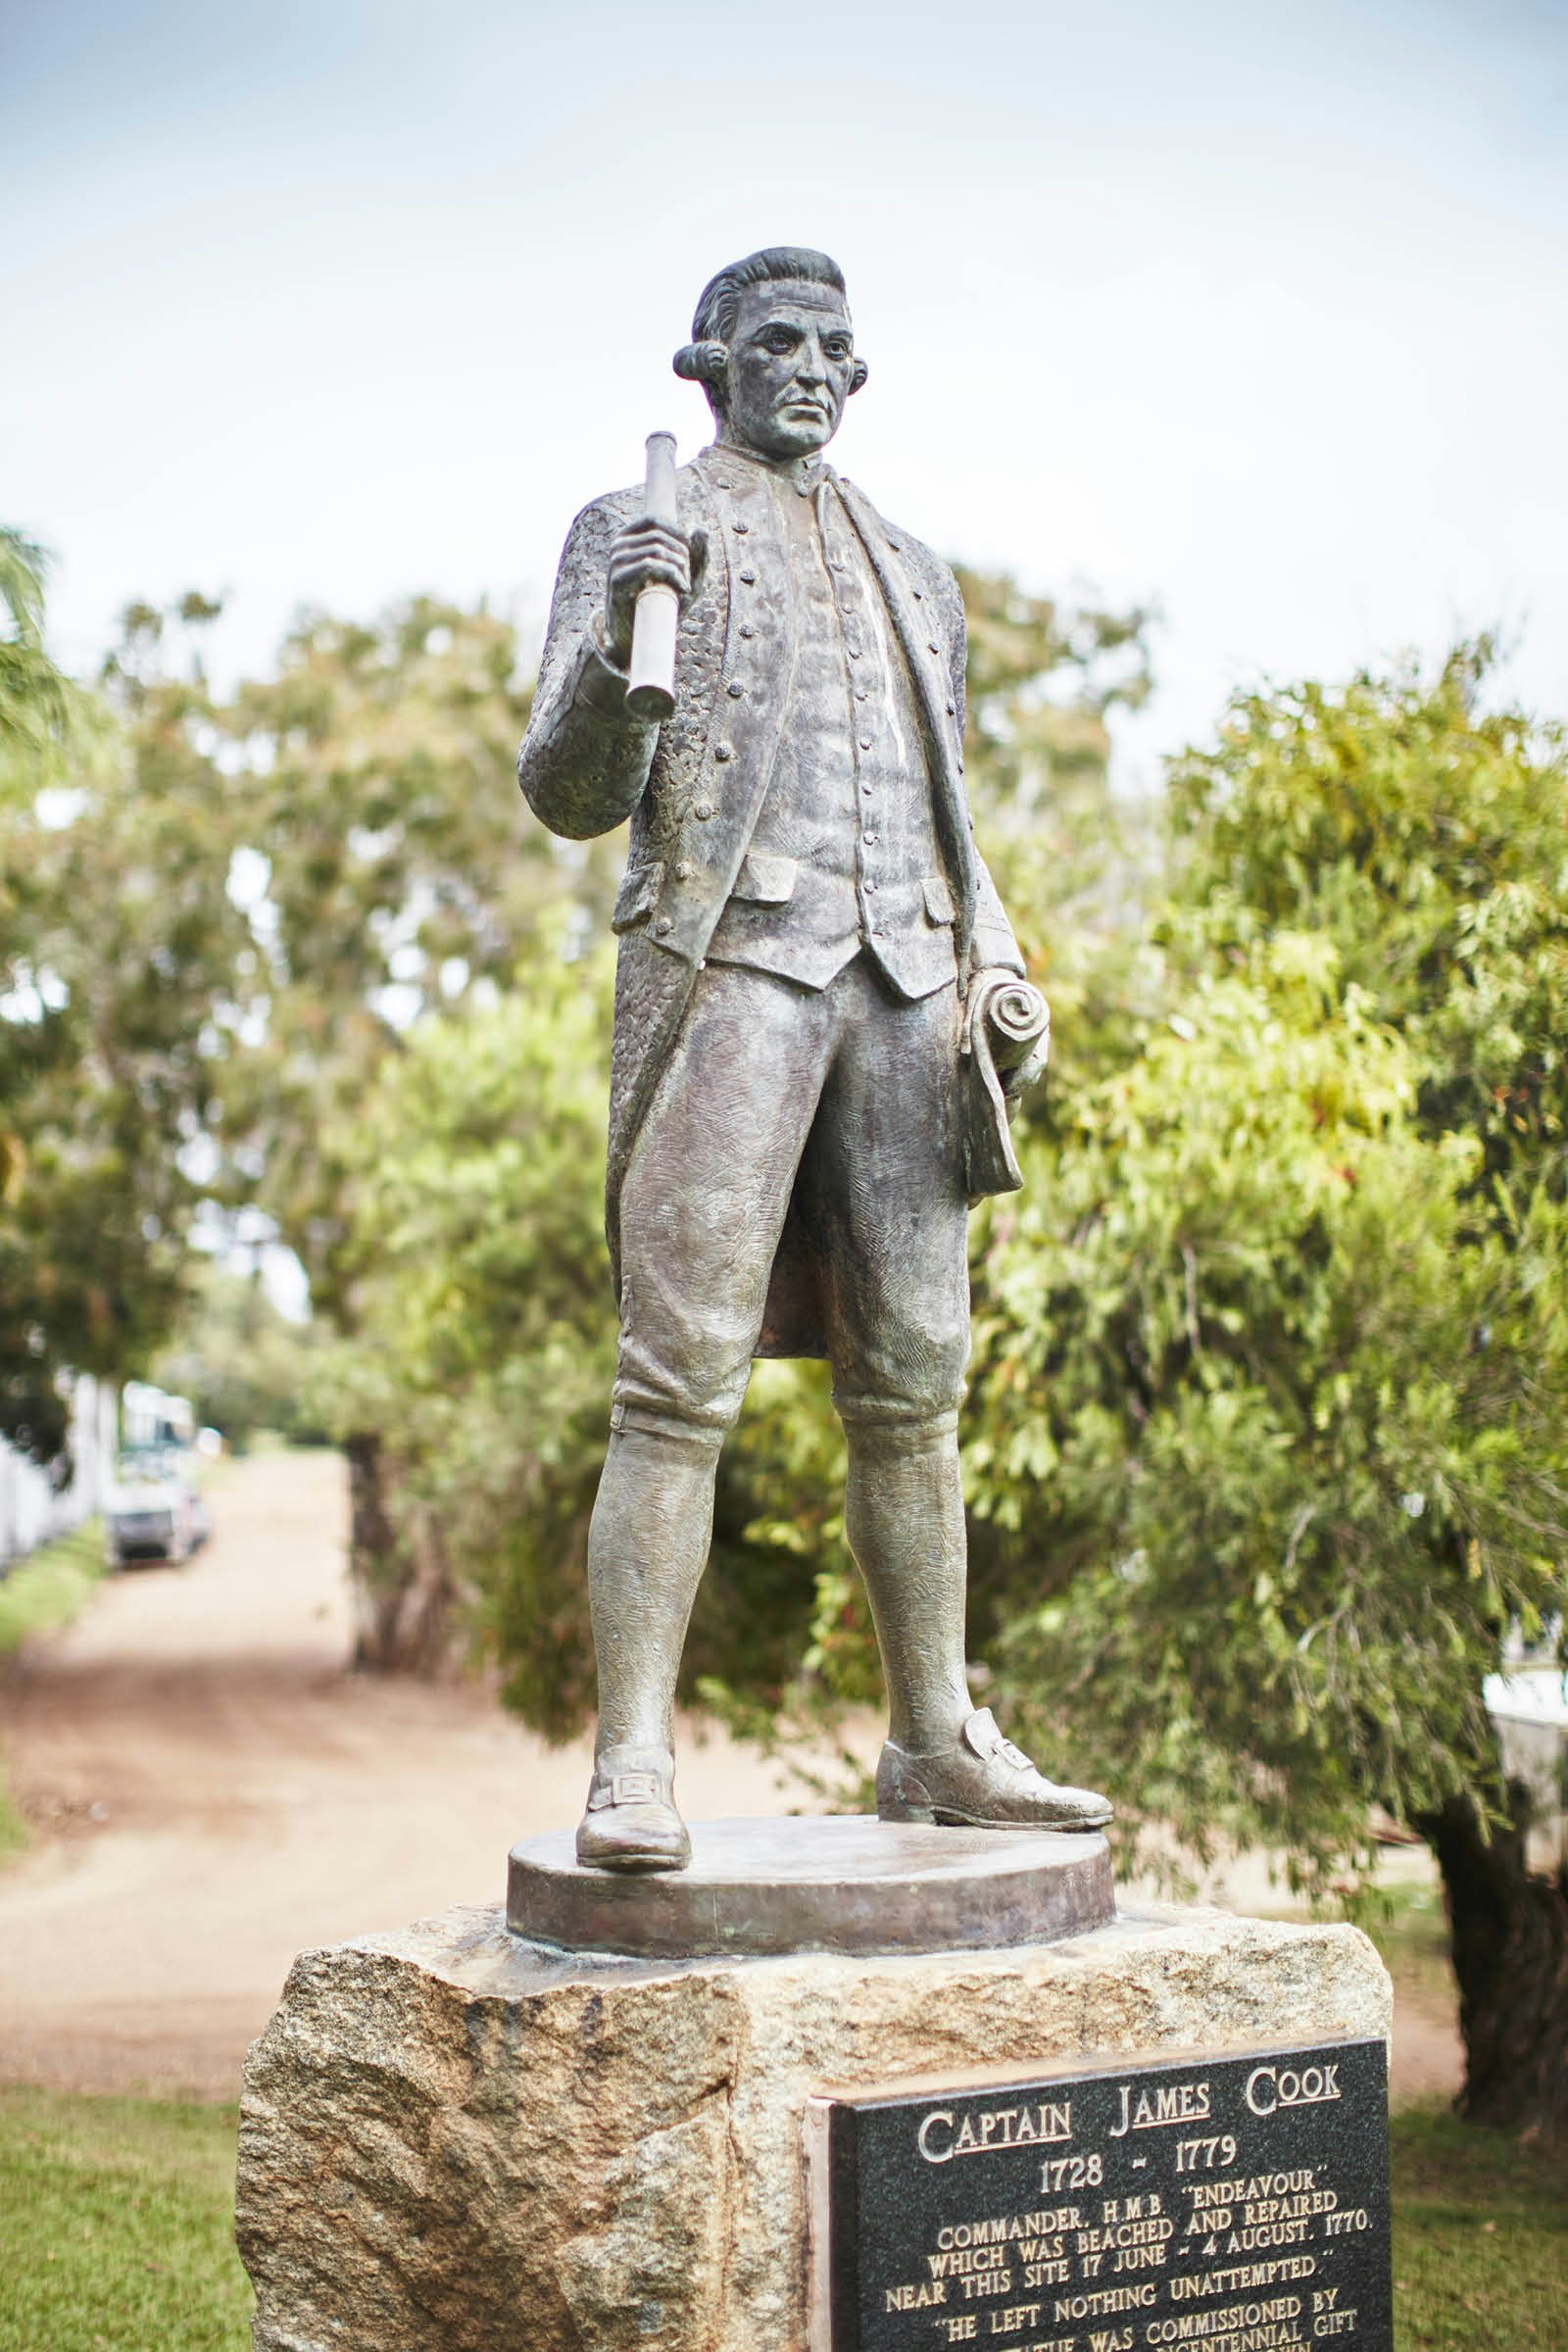 Captain James Cook's statue in Cooktown